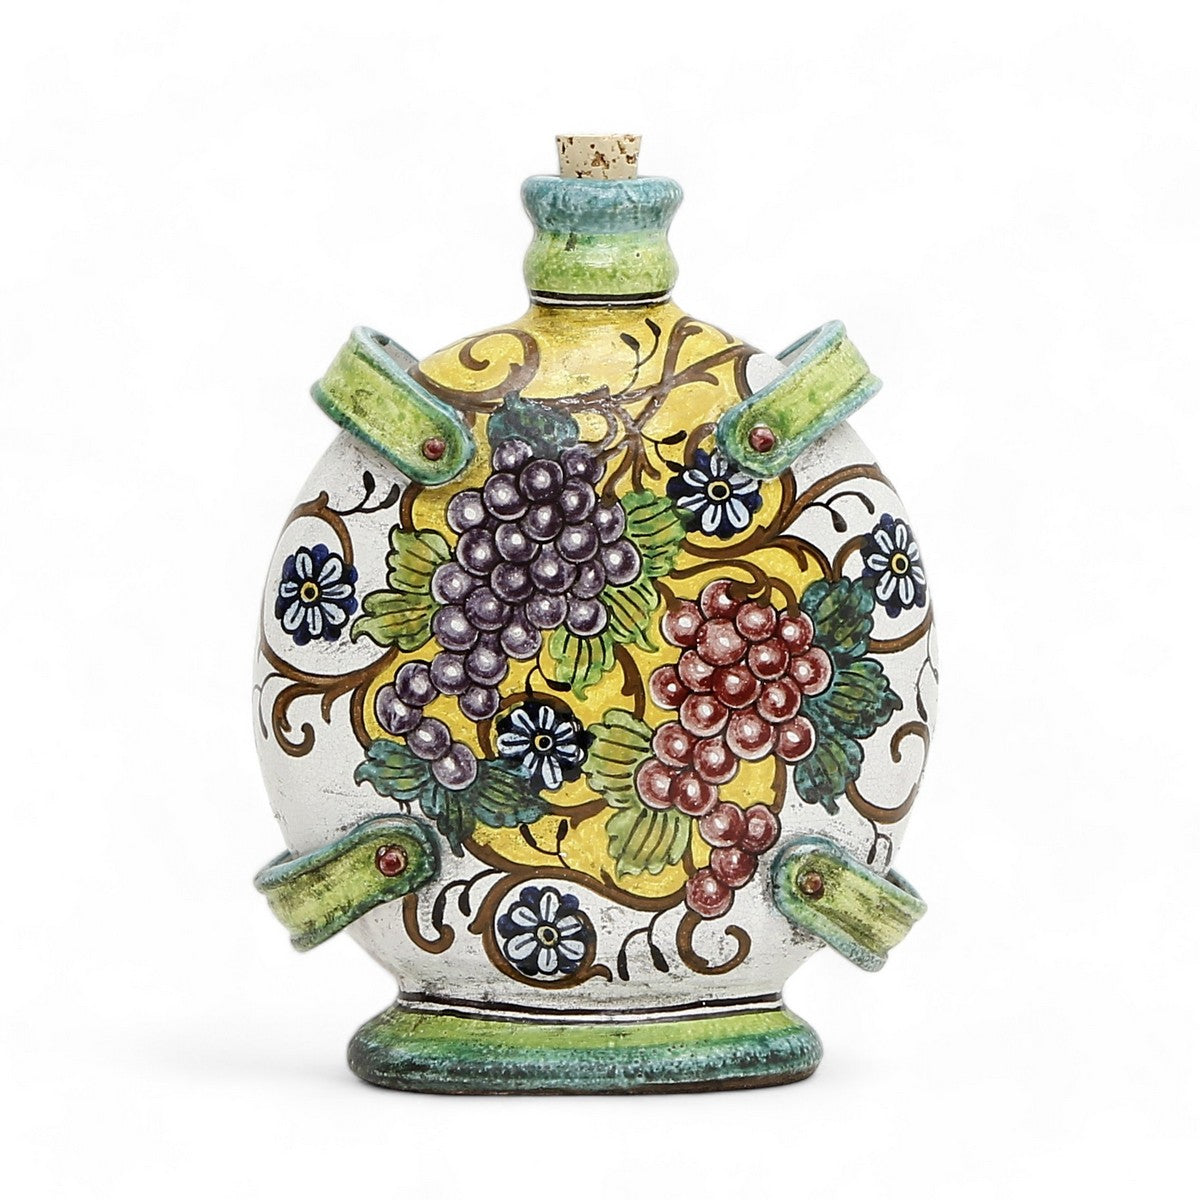 TUSCAN MAJOLICA: Old World Tuscan Flask with four handles and cork.